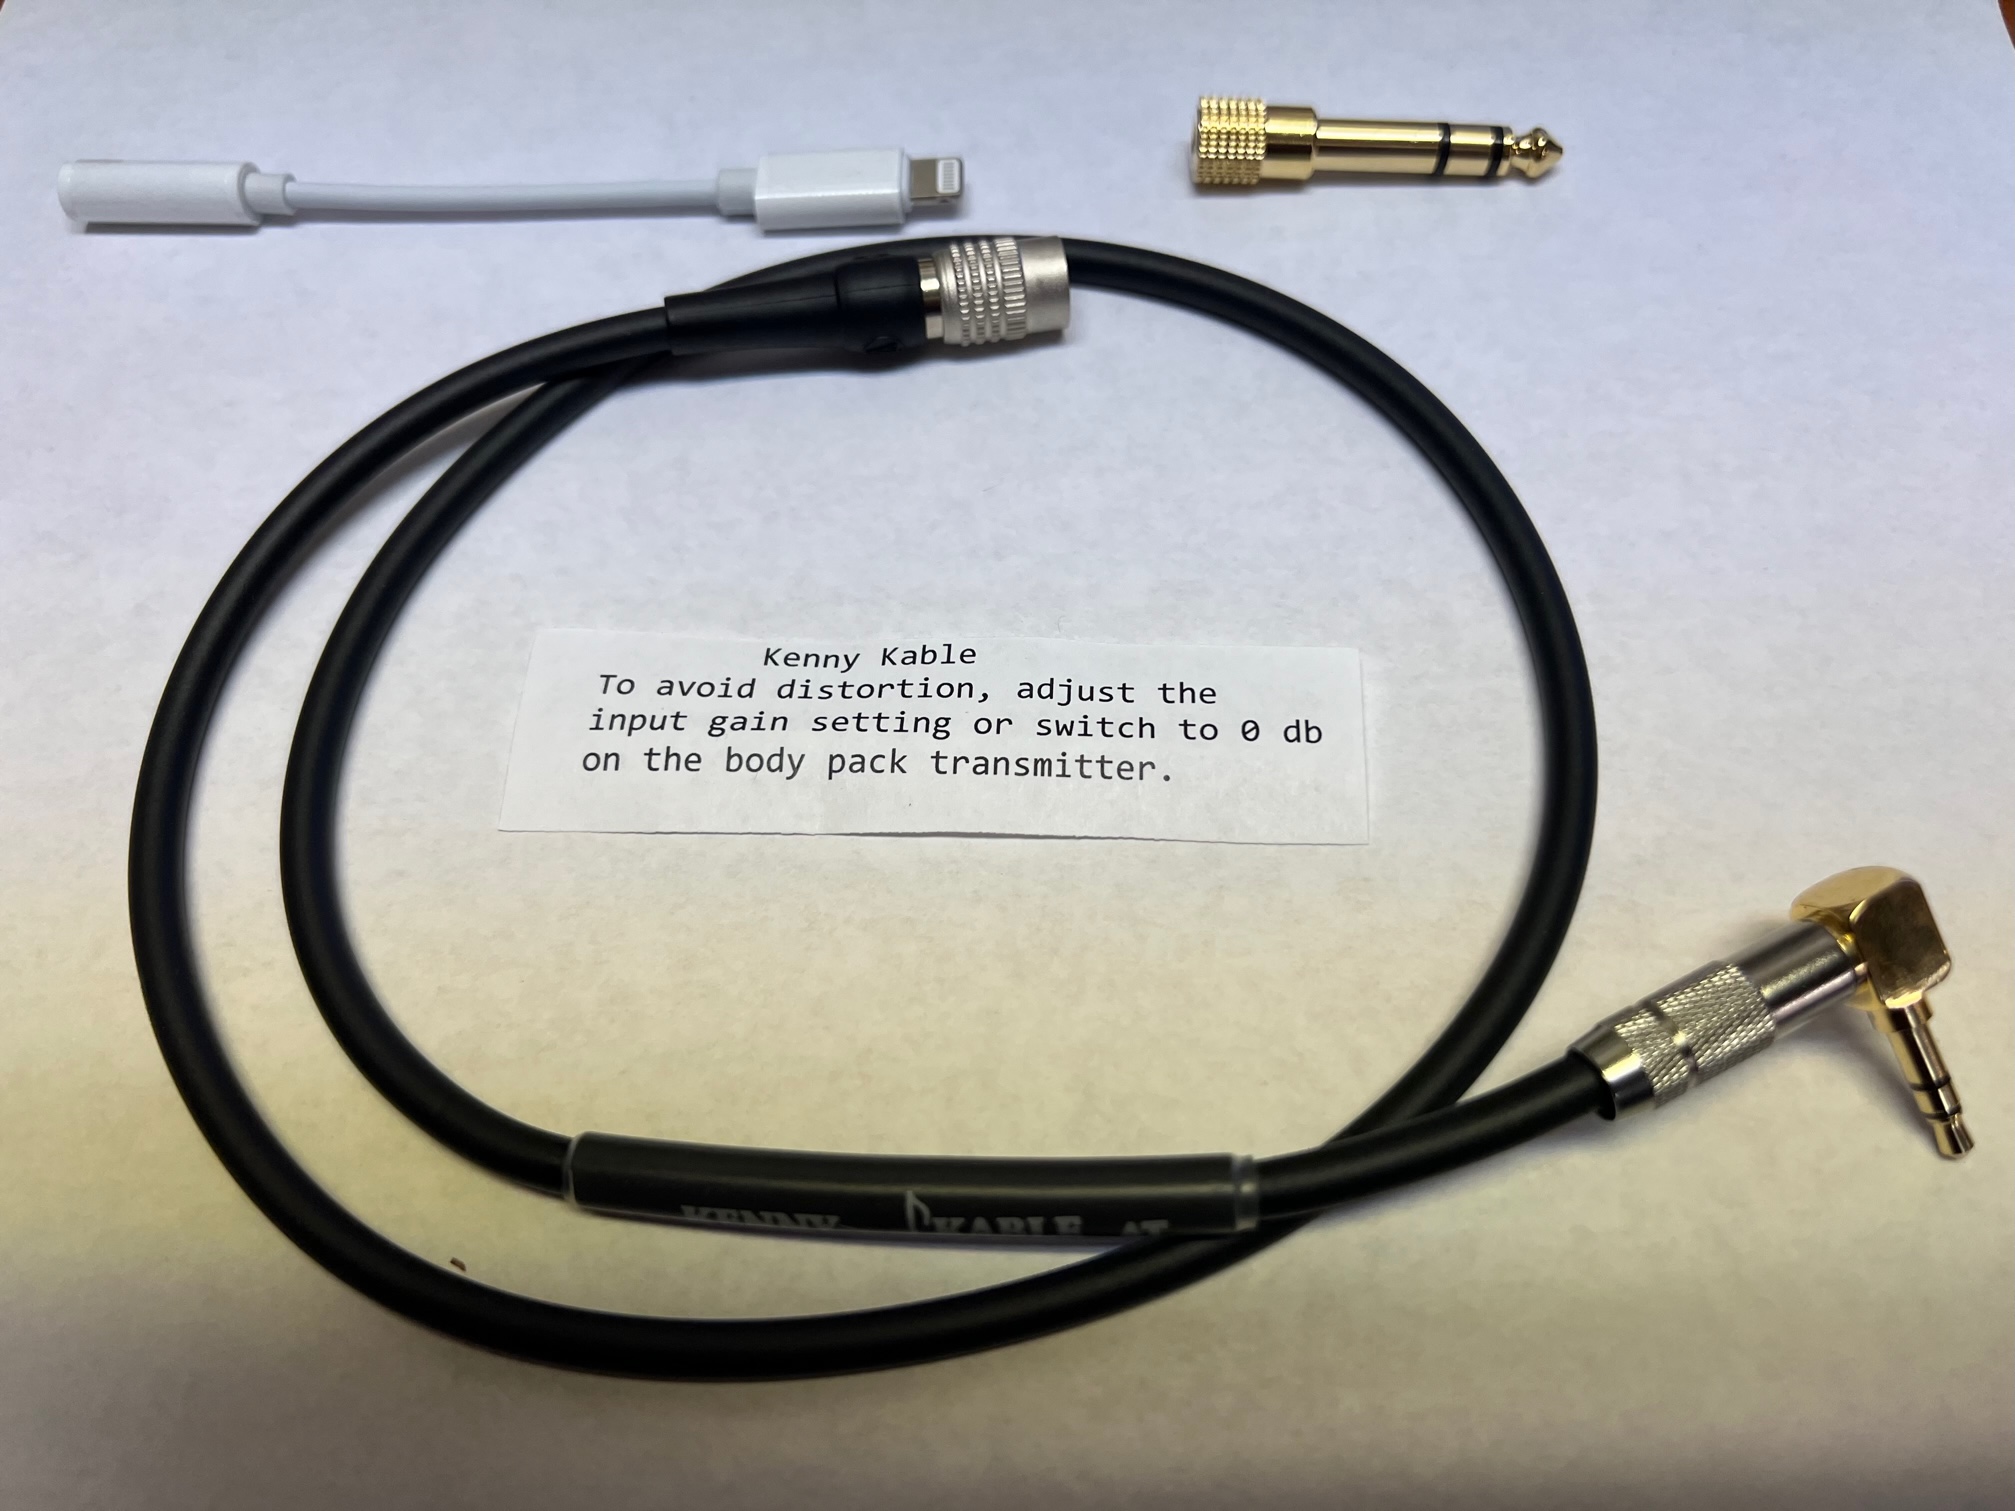 Kenny Kable AT (Audio-Technica) beltpack adapter cable